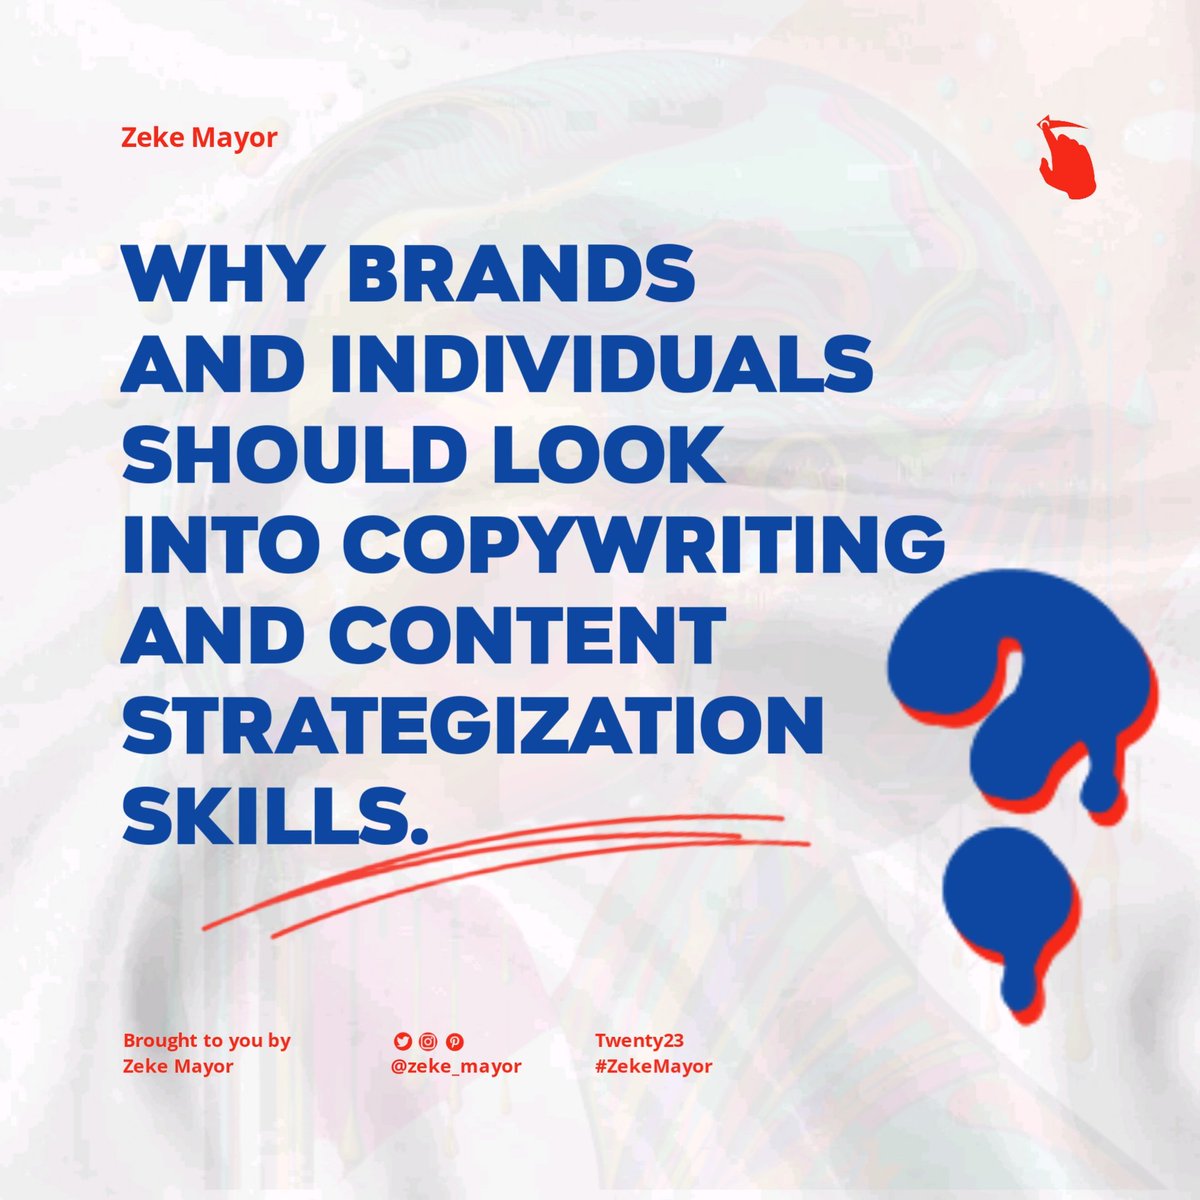 Why brands and individuals that are into sales marketing and brand optimization should look into perfect pitch copy and content strategization. #CopywritingForSale #SEOContentStrategy #BrandOptimization  #SalesMarketing
#PerfectPitch #ContentStrategization #SocialMediaMarketing